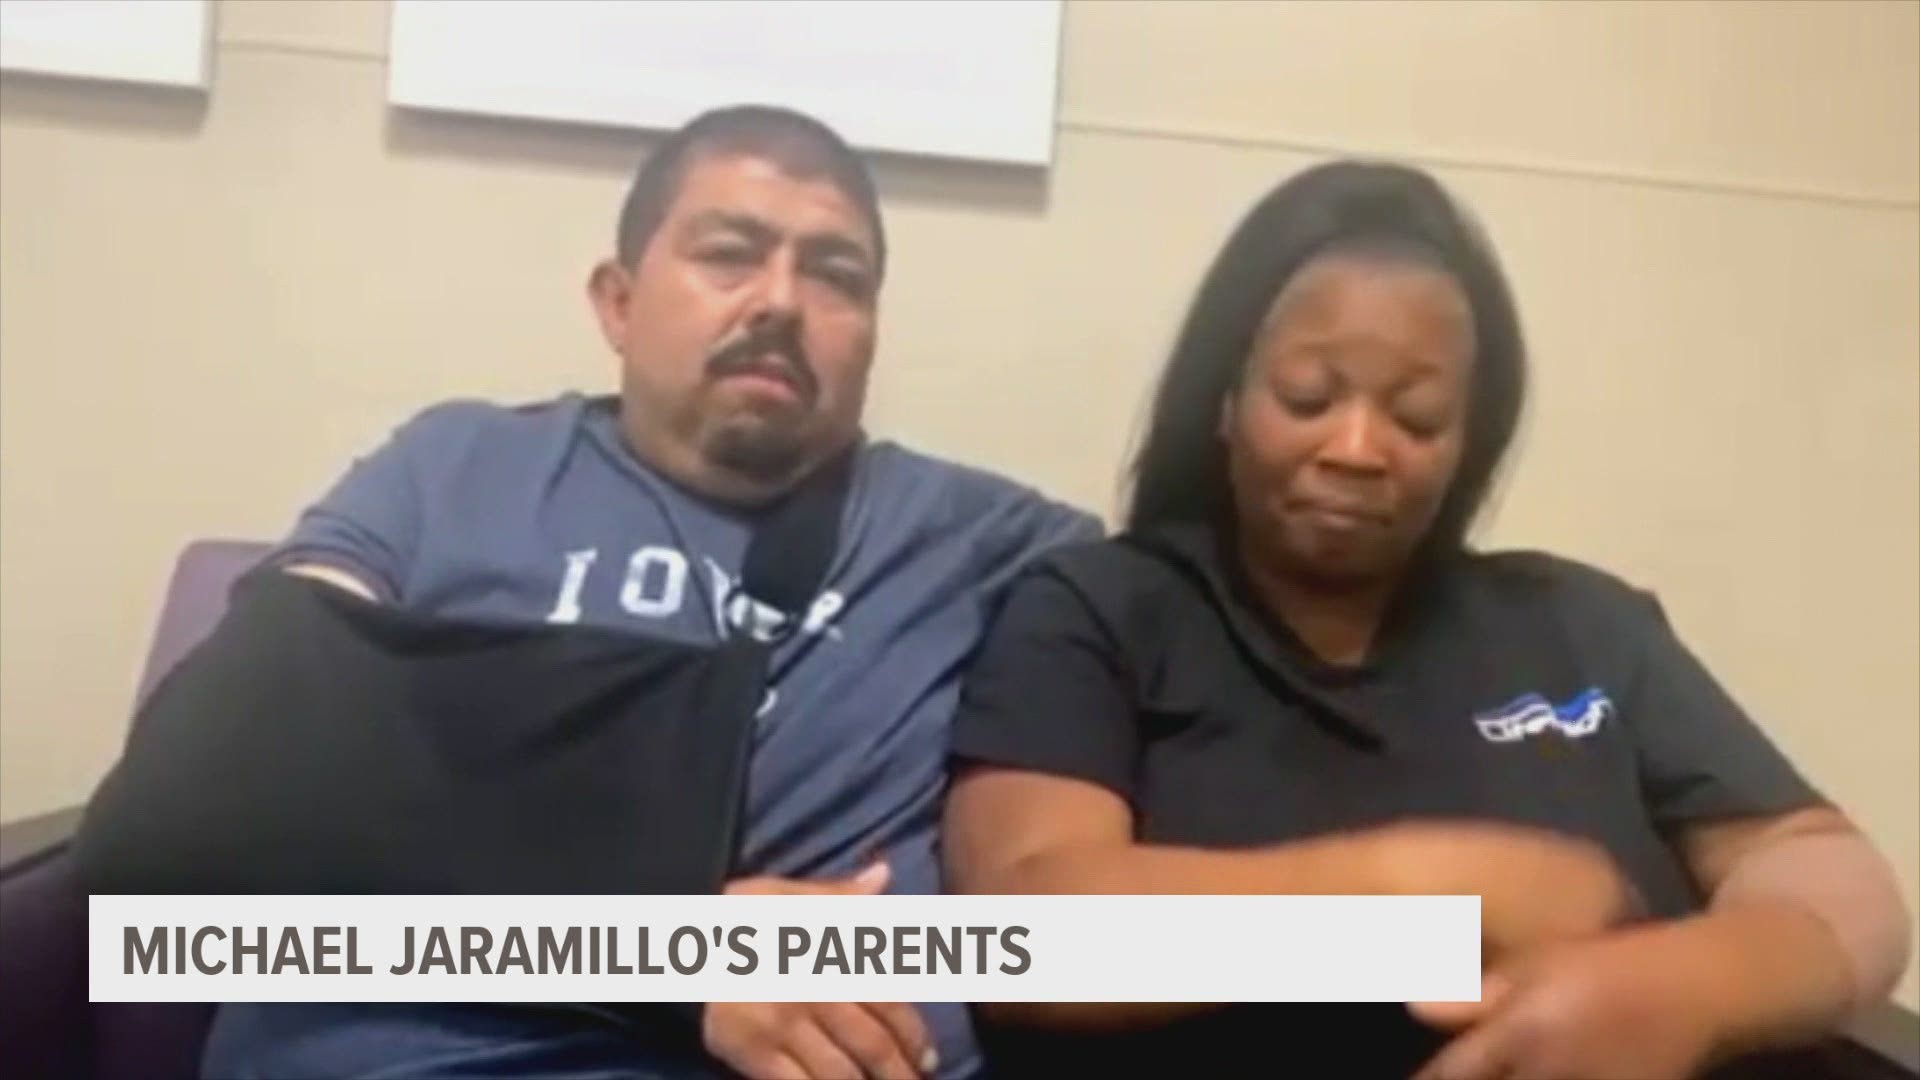 In an exclusive interview with ABC News, the parents of 11-year-old Michael Jaramillo discuss what happened.